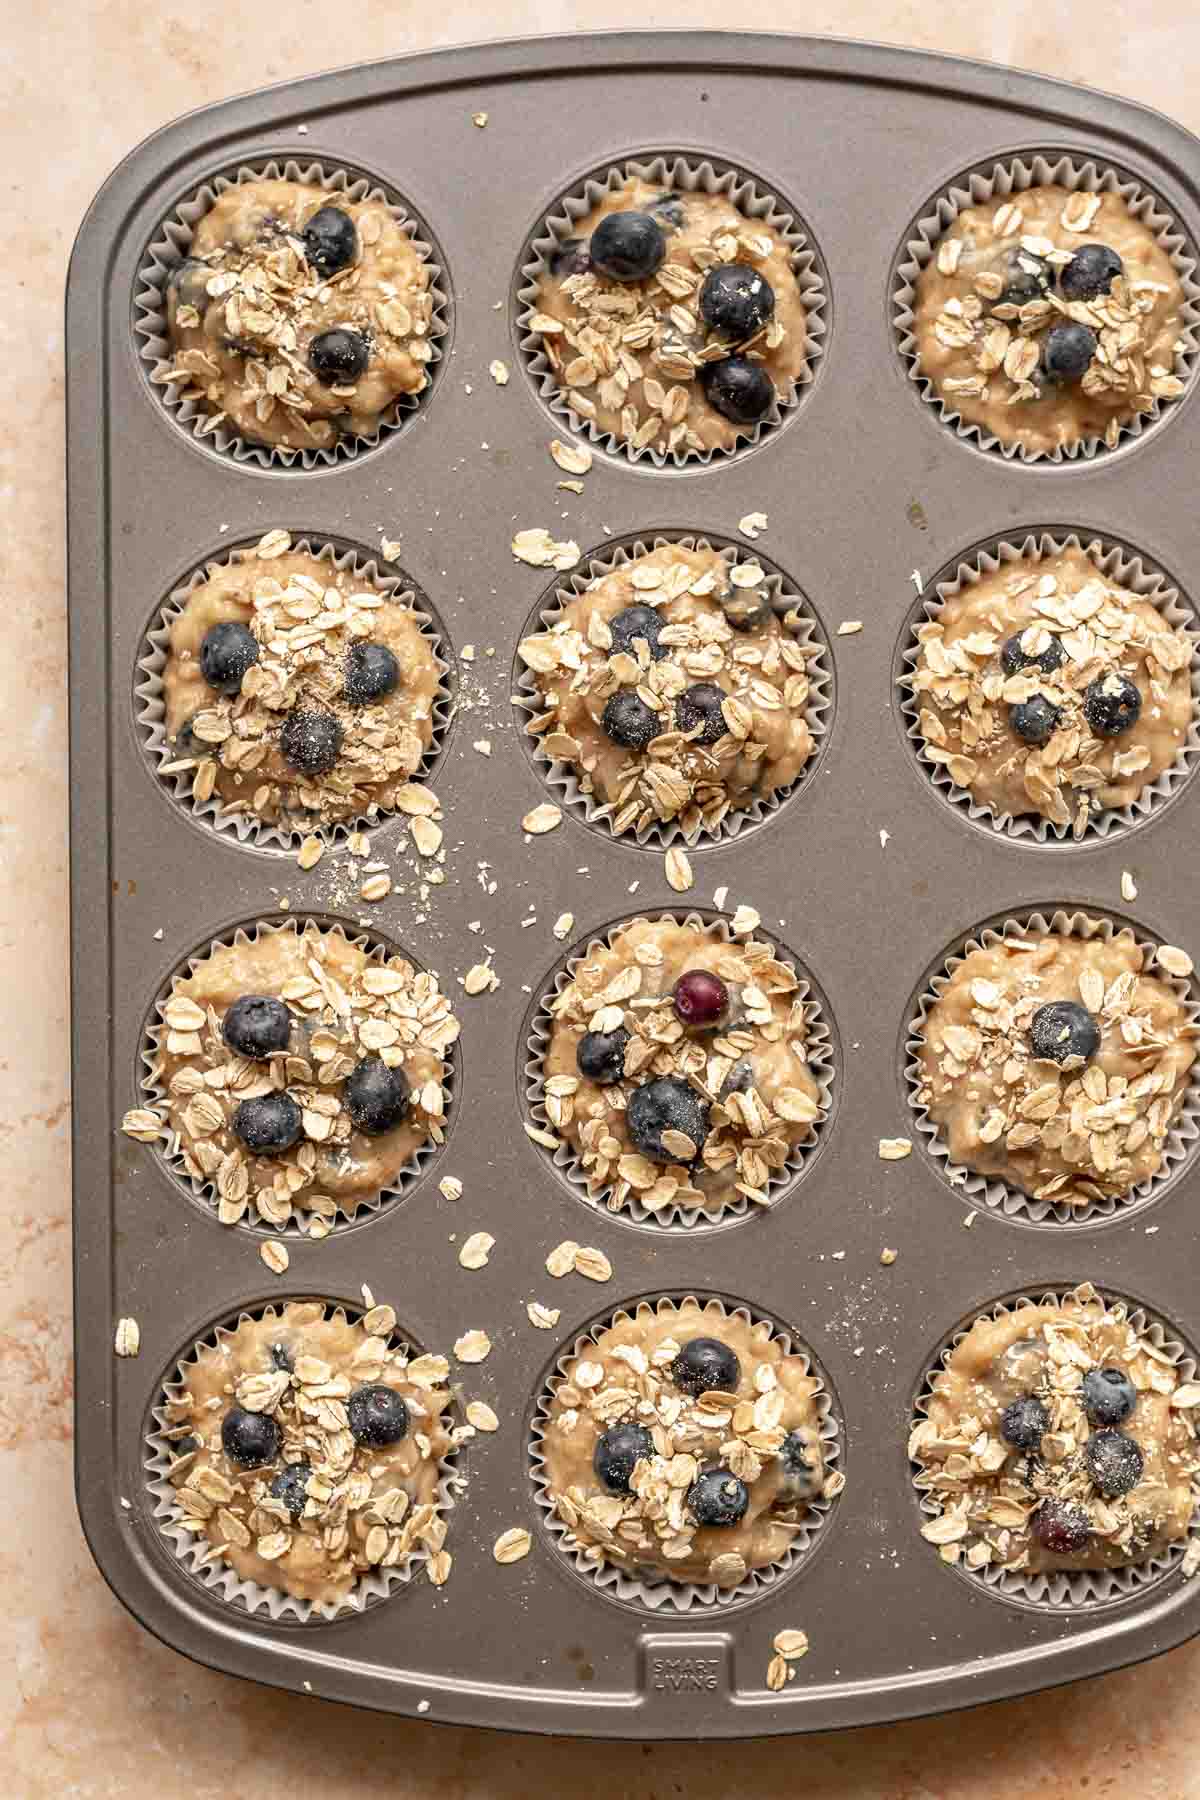 Pre-baked muffins with oats scattered on top.